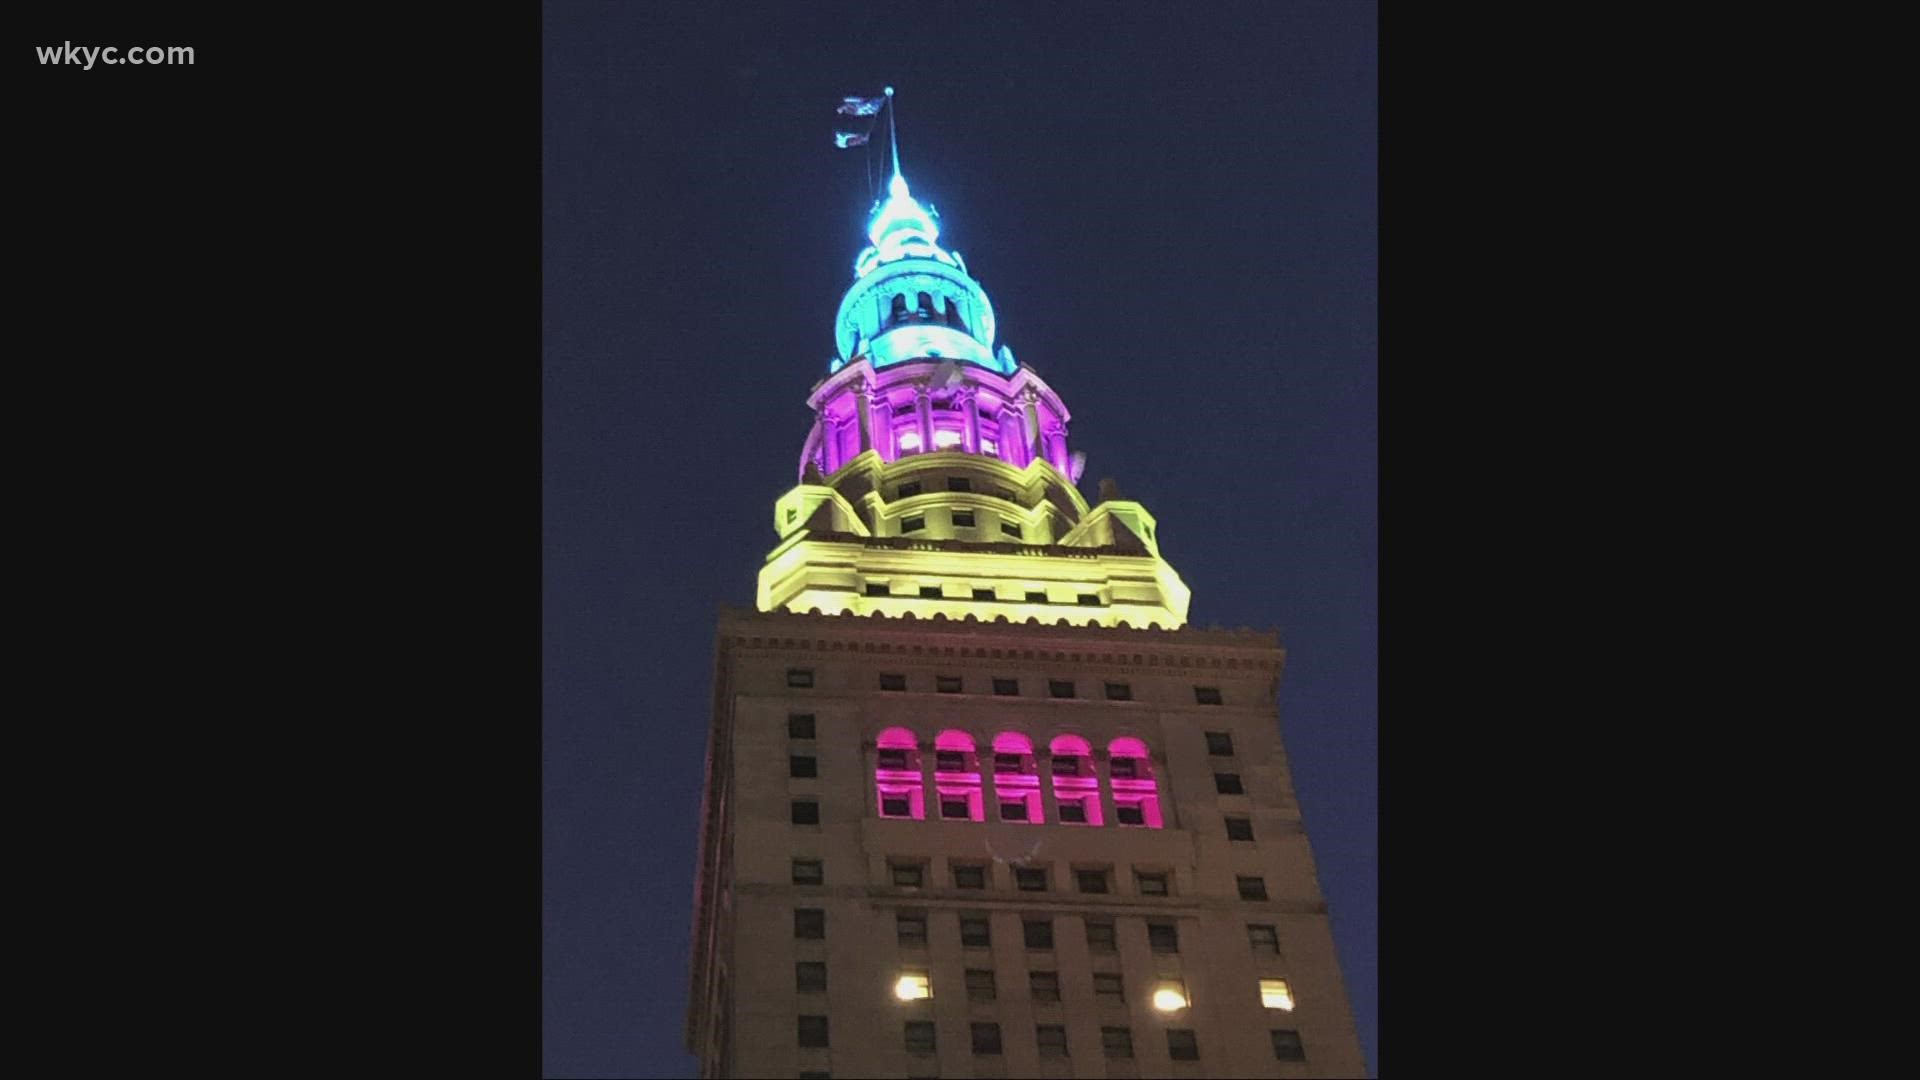 Landmarks across the country, including in Cleveland, will 'Light up for MBC' in honor of those who are ill.